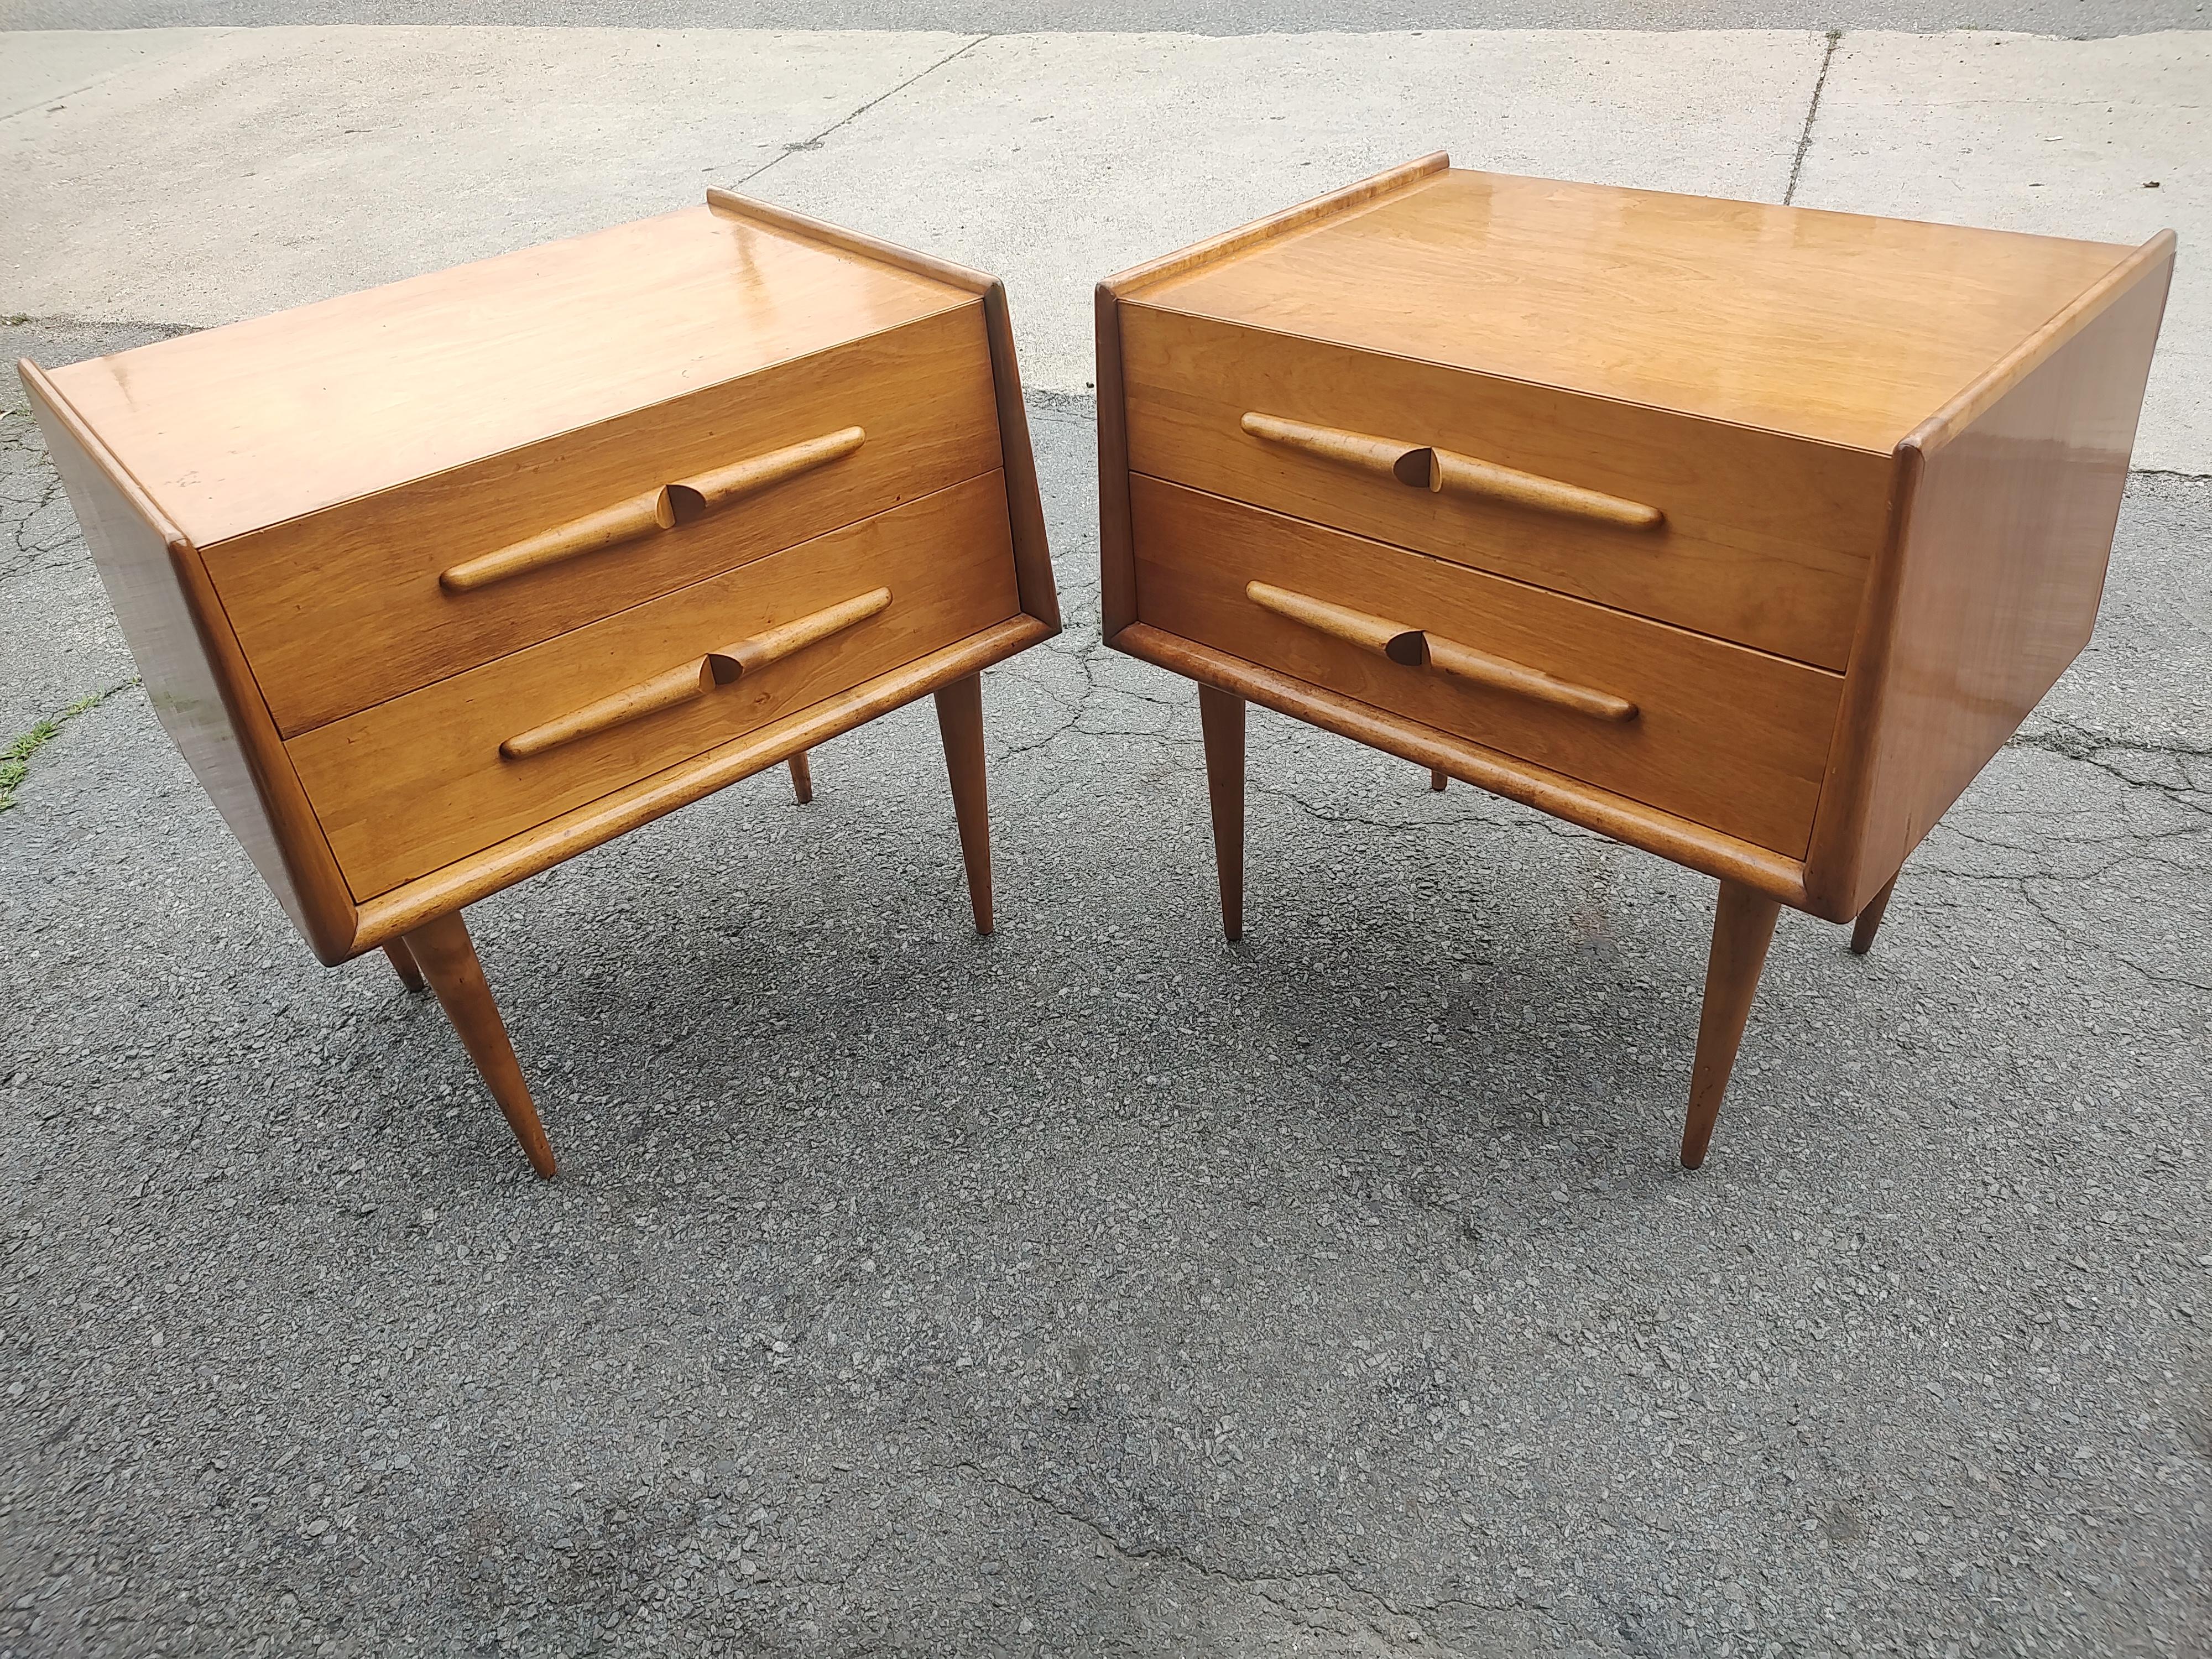 Pair of Mid Century Modern Night Stands in Birch by Edmond Spence Sweden C1953 For Sale 1